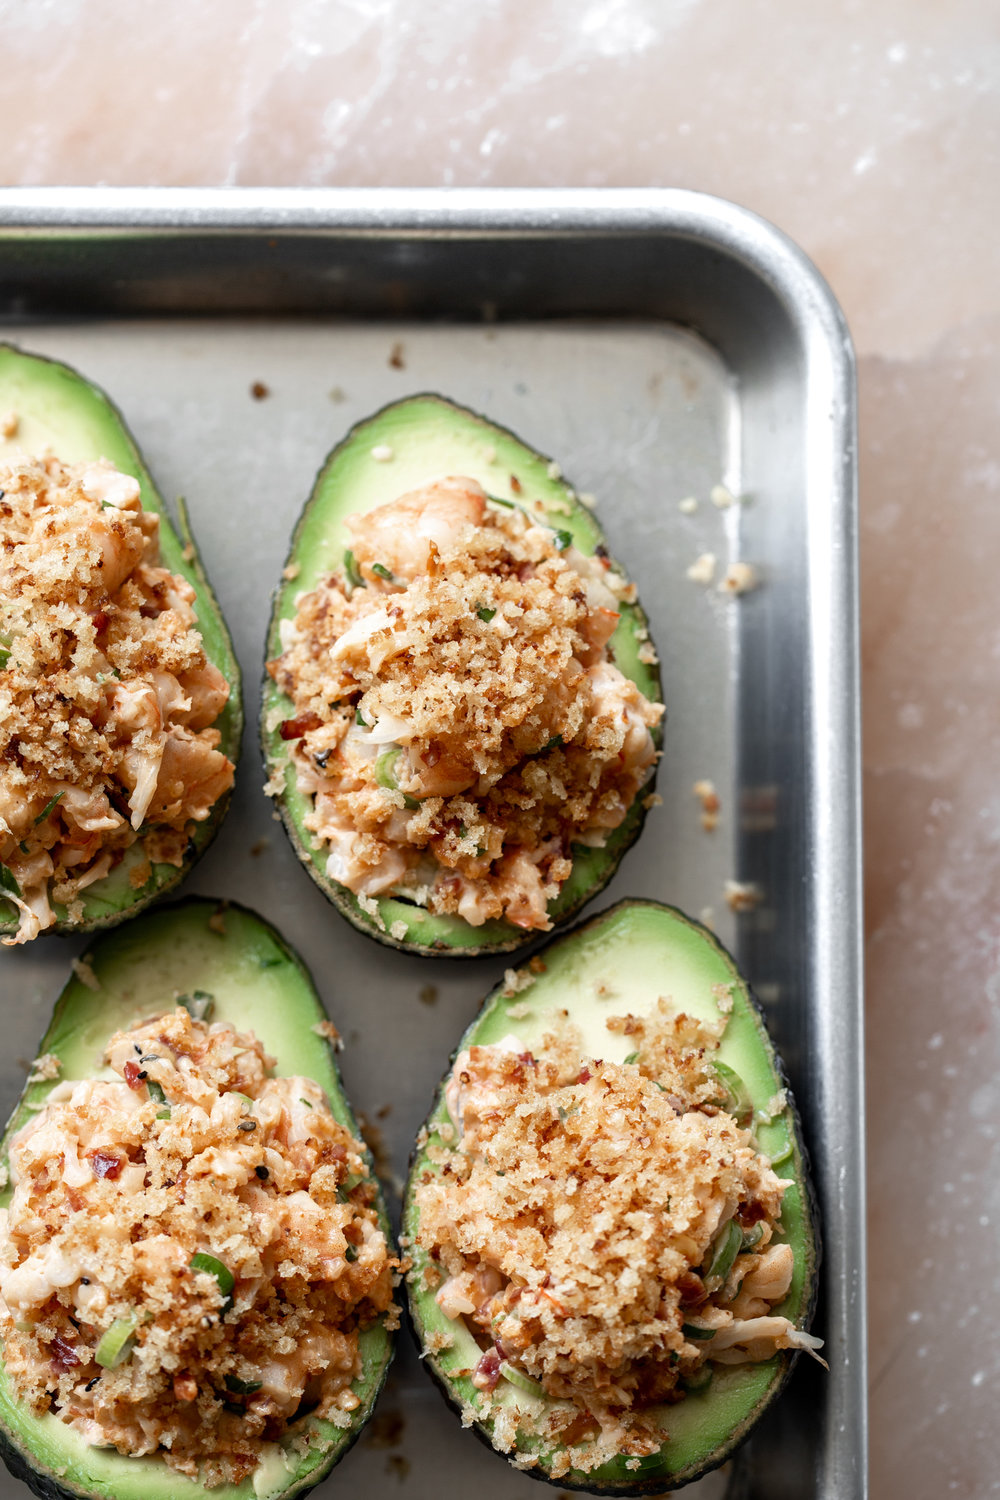 stuffed avocados on baking sheet to broil